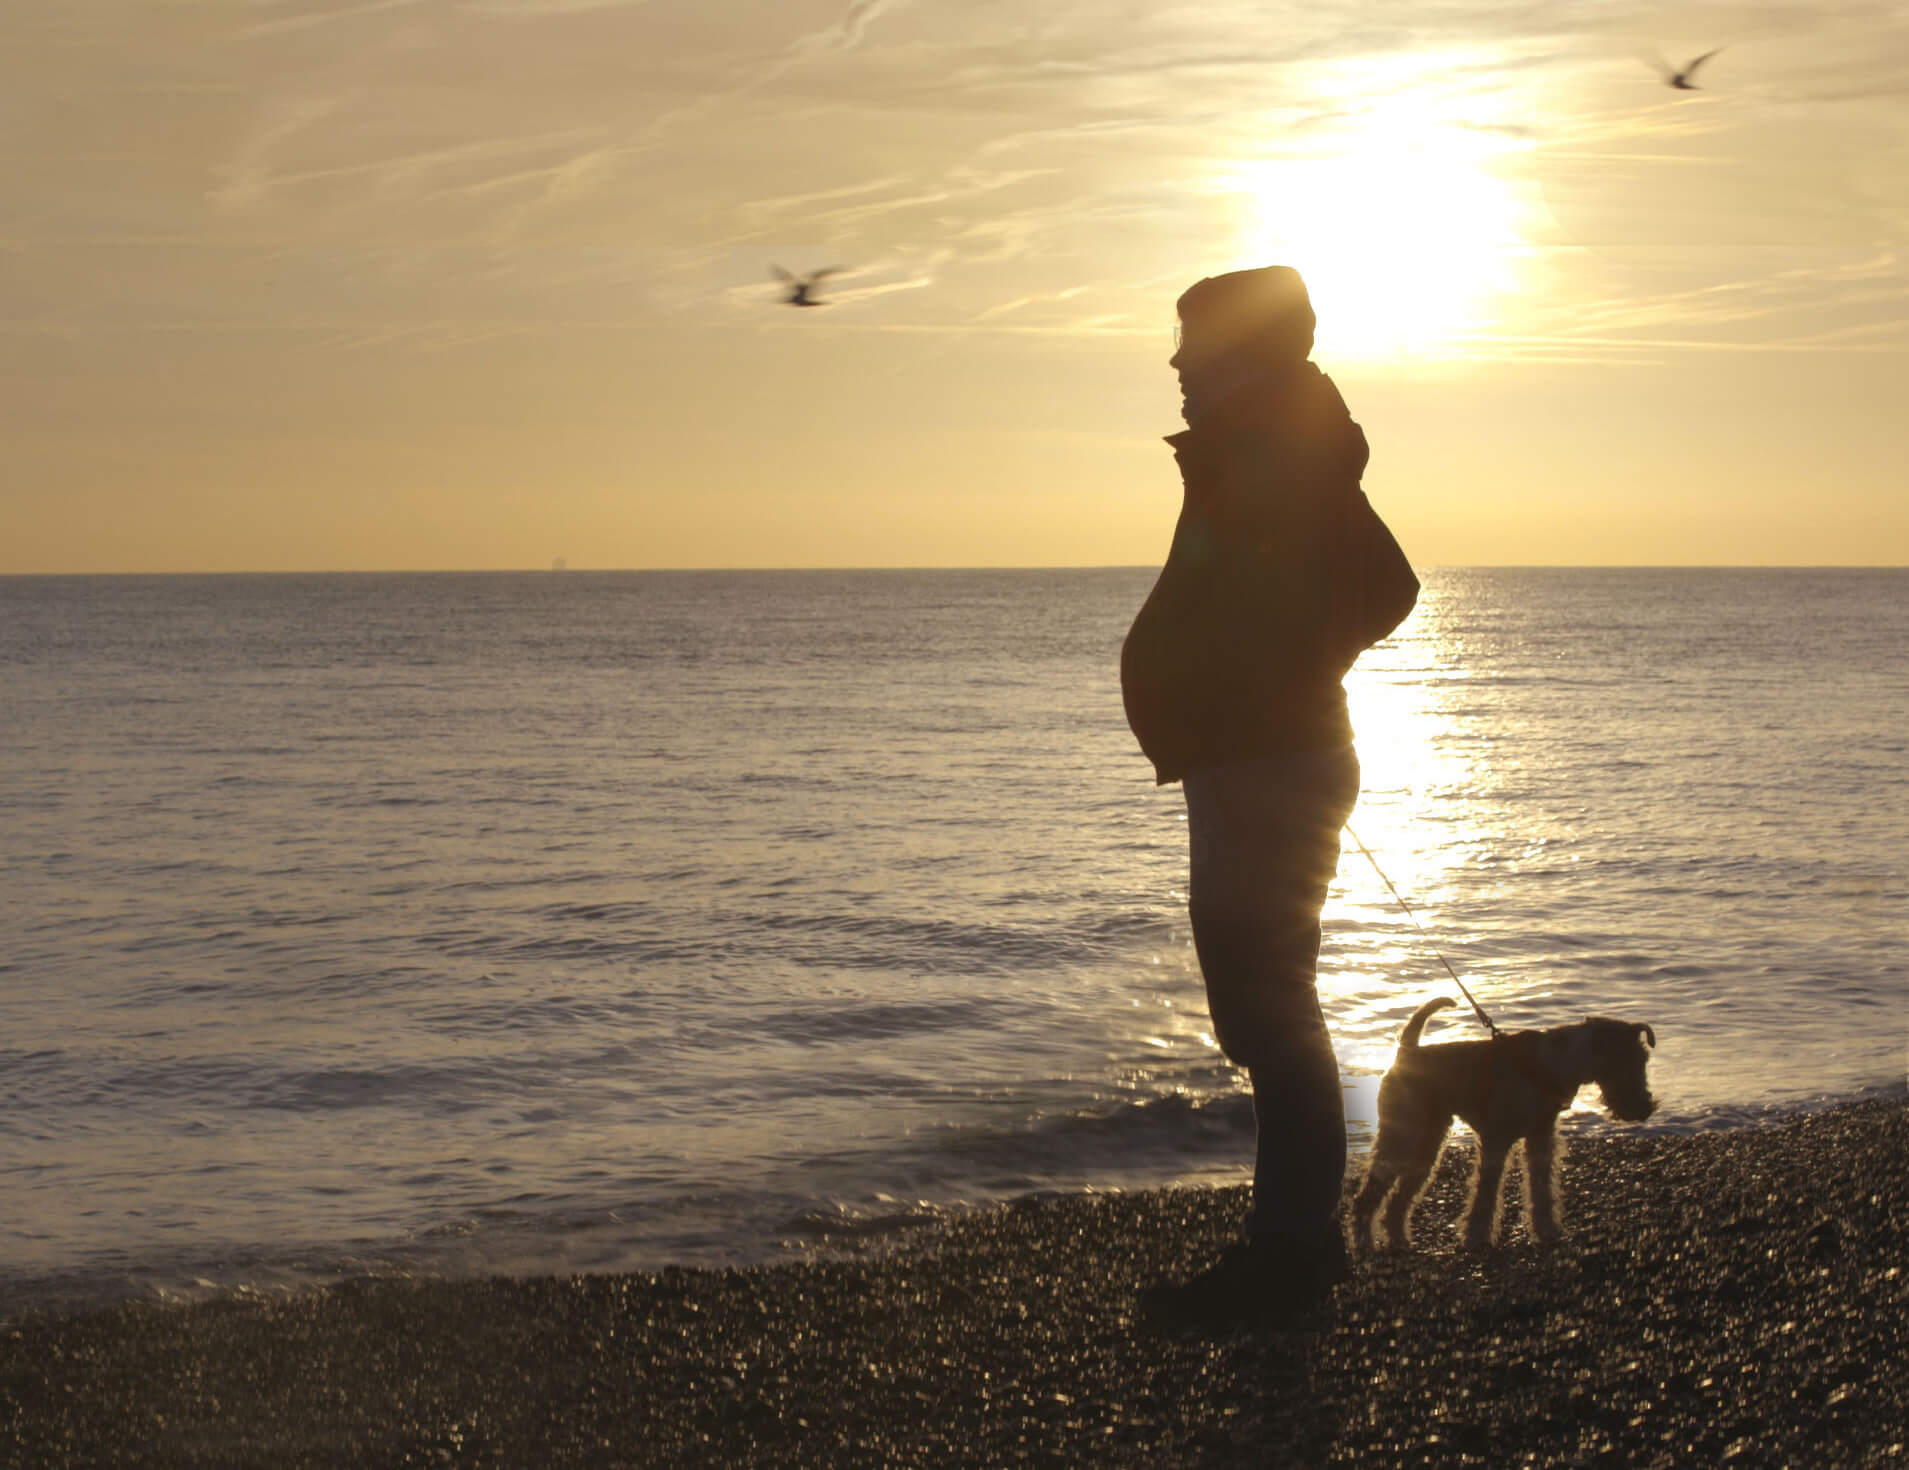 Still from Seahorse: The Dad Who Gave Birth. Freddy is standing on the seashore with his fox terrier dog. He is 9 months pregnant and is silhouetted by the sun.